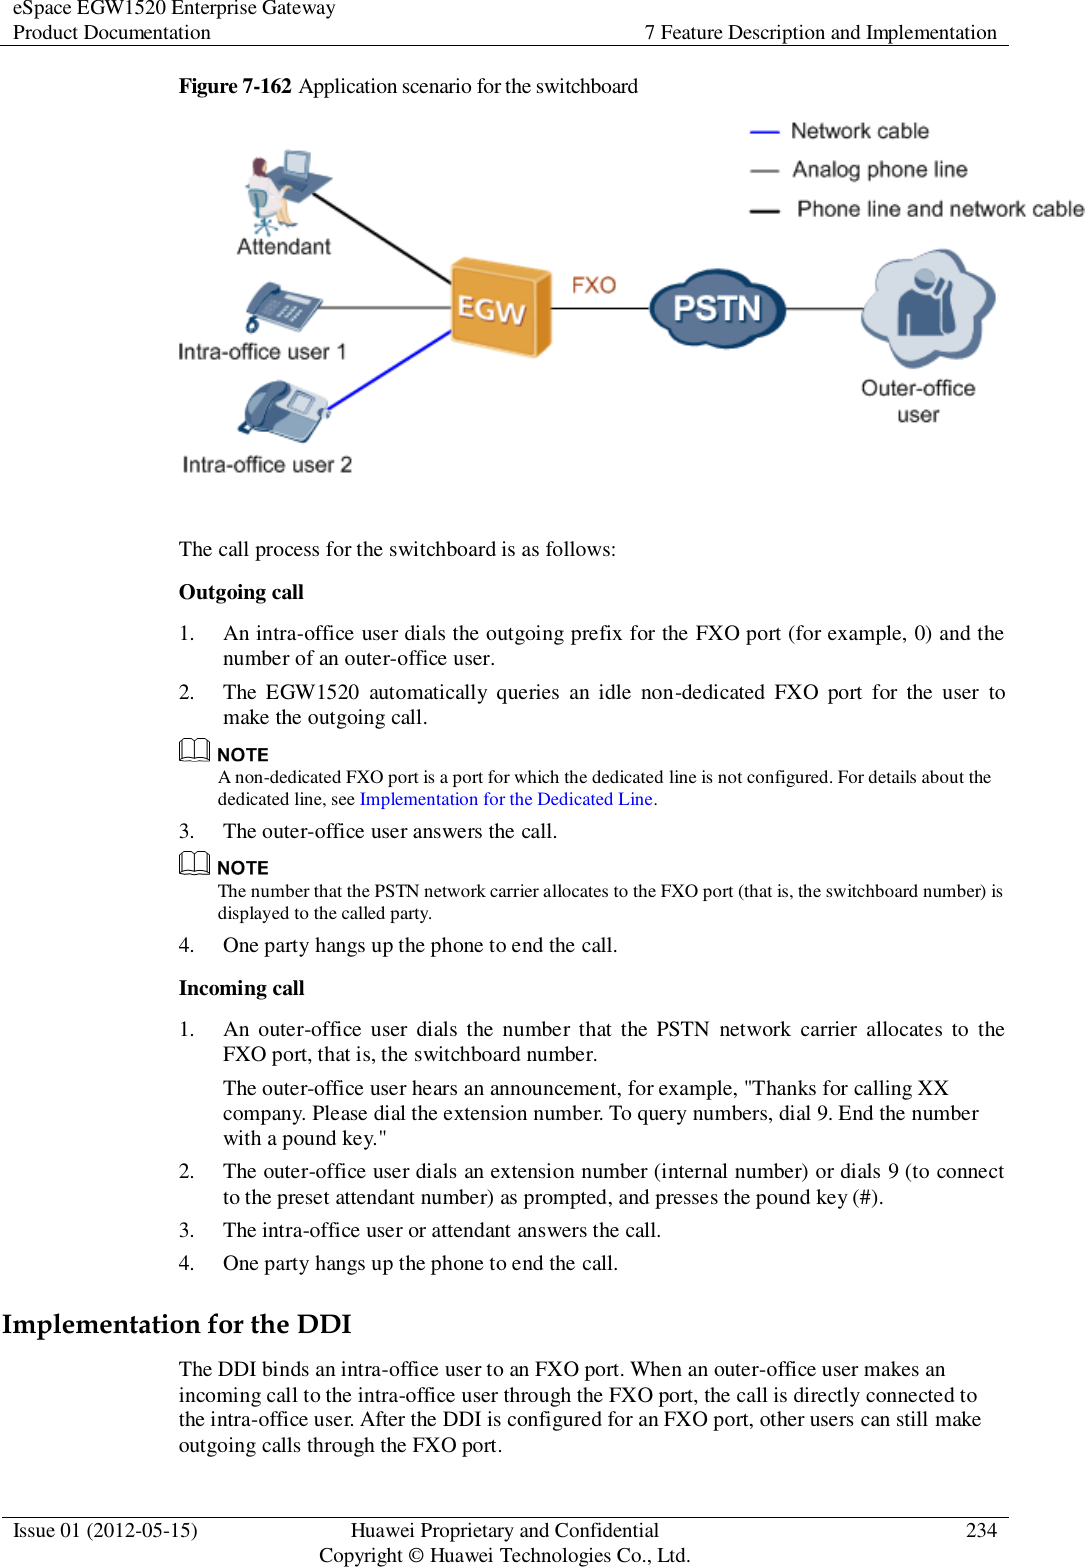 eSpace EGW1520 Enterprise Gateway Product Documentation 7 Feature Description and Implementation  Issue 01 (2012-05-15) Huawei Proprietary and Confidential                                     Copyright © Huawei Technologies Co., Ltd. 234  Figure 7-162 Application scenario for the switchboard   The call process for the switchboard is as follows: Outgoing call 1. An intra-office user dials the outgoing prefix for the FXO port (for example, 0) and the number of an outer-office user. 2. The  EGW1520  automatically  queries  an  idle  non-dedicated  FXO  port  for  the  user  to make the outgoing call.  A non-dedicated FXO port is a port for which the dedicated line is not configured. For details about the dedicated line, see Implementation for the Dedicated Line. 3. The outer-office user answers the call.  The number that the PSTN network carrier allocates to the FXO port (that is, the switchboard number) is displayed to the called party. 4. One party hangs up the phone to end the call. Incoming call 1. An  outer-office  user  dials  the number  that  the PSTN  network  carrier  allocates to  the FXO port, that is, the switchboard number. The outer-office user hears an announcement, for example, &quot;Thanks for calling XX company. Please dial the extension number. To query numbers, dial 9. End the number with a pound key.&quot; 2. The outer-office user dials an extension number (internal number) or dials 9 (to connect to the preset attendant number) as prompted, and presses the pound key (#). 3. The intra-office user or attendant answers the call. 4. One party hangs up the phone to end the call. Implementation for the DDI The DDI binds an intra-office user to an FXO port. When an outer-office user makes an incoming call to the intra-office user through the FXO port, the call is directly connected to the intra-office user. After the DDI is configured for an FXO port, other users can still make outgoing calls through the FXO port. 